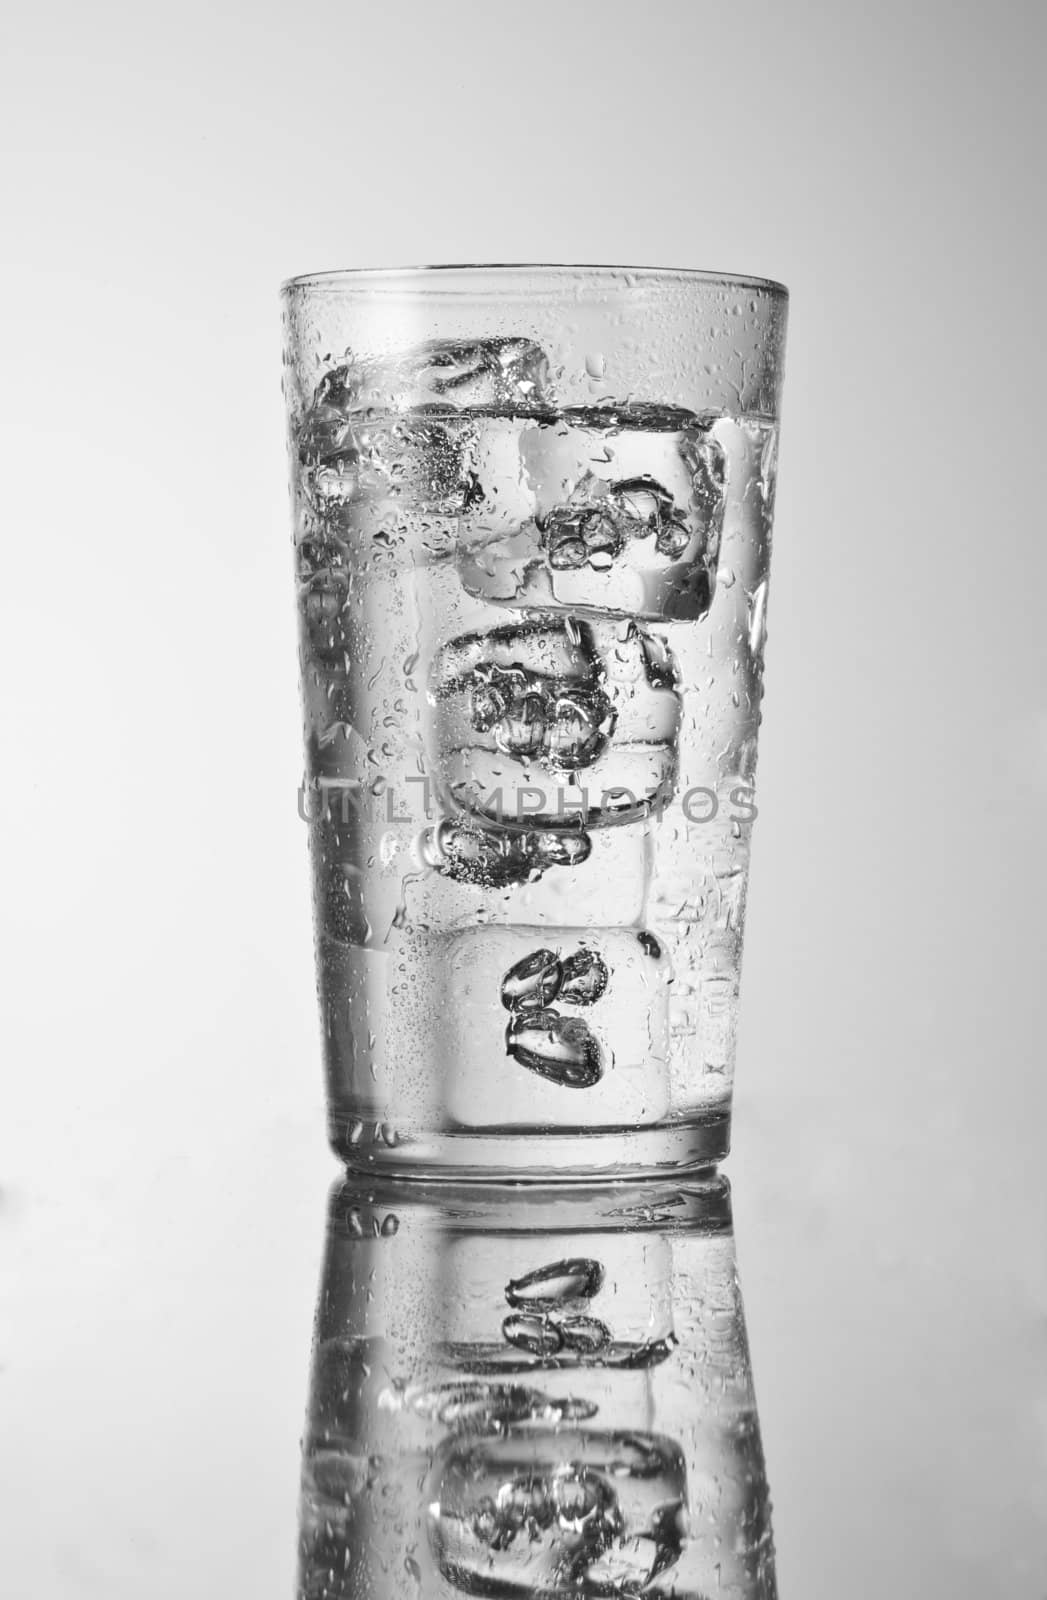 glass with pure cold water and ice